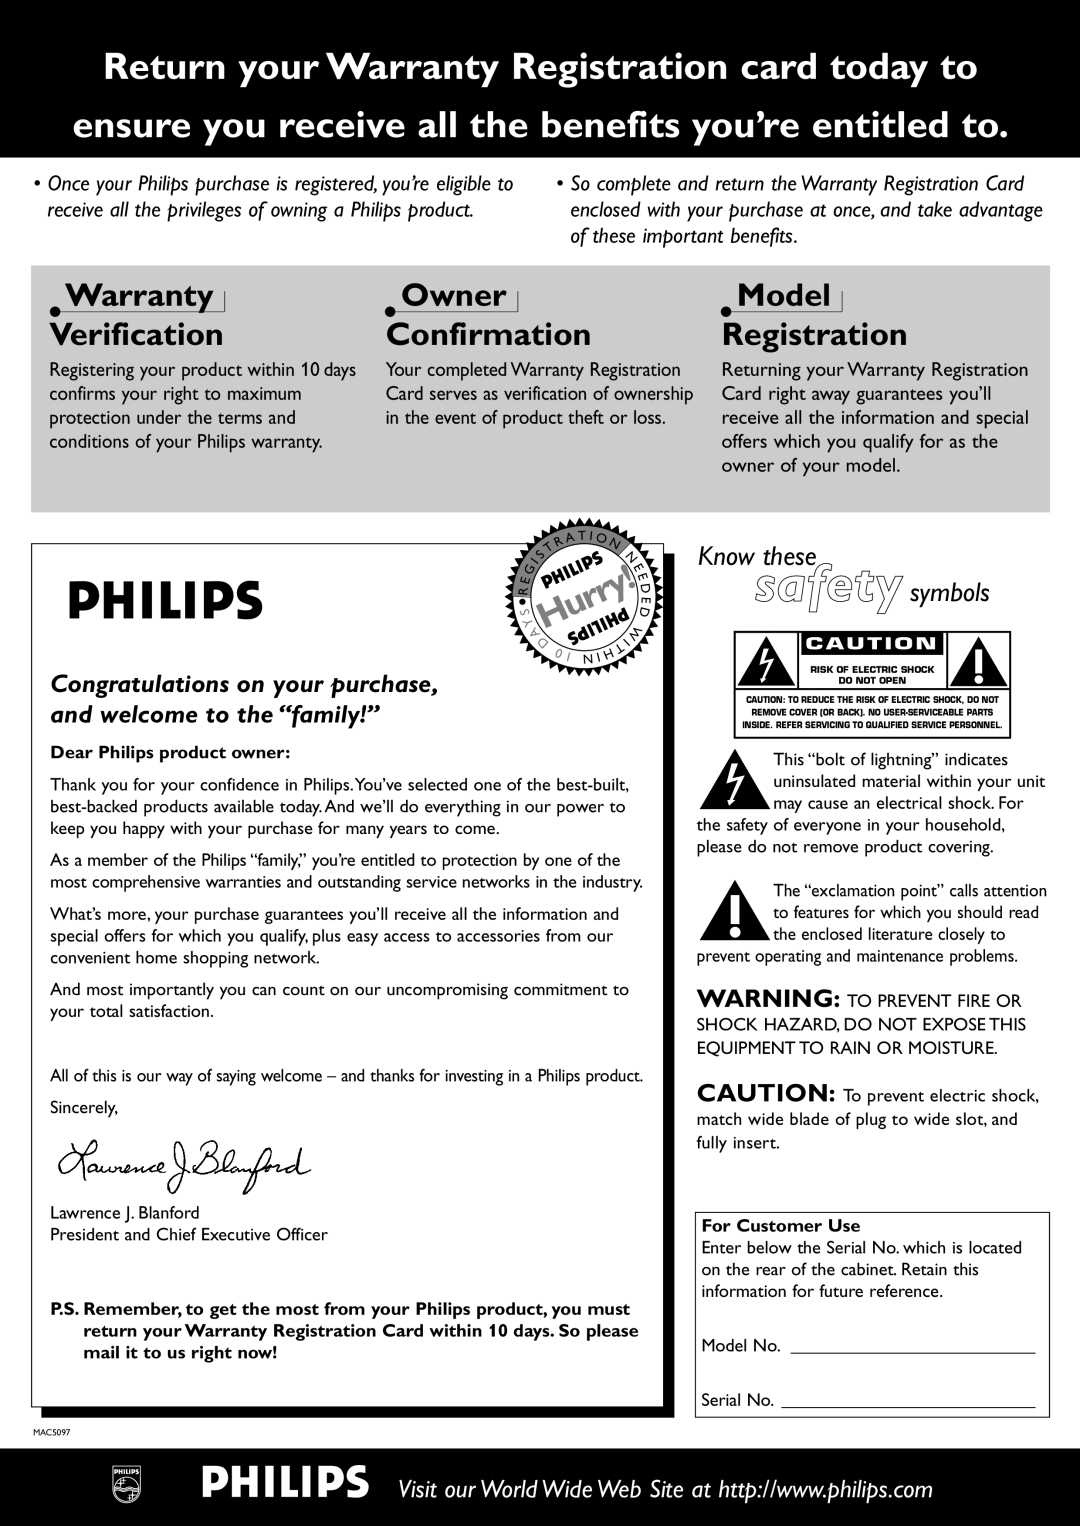 Philips CDR-795 manual Warranty Verification, Owner Confirmation, Model Registration, Hurry, Know these safety symbols 